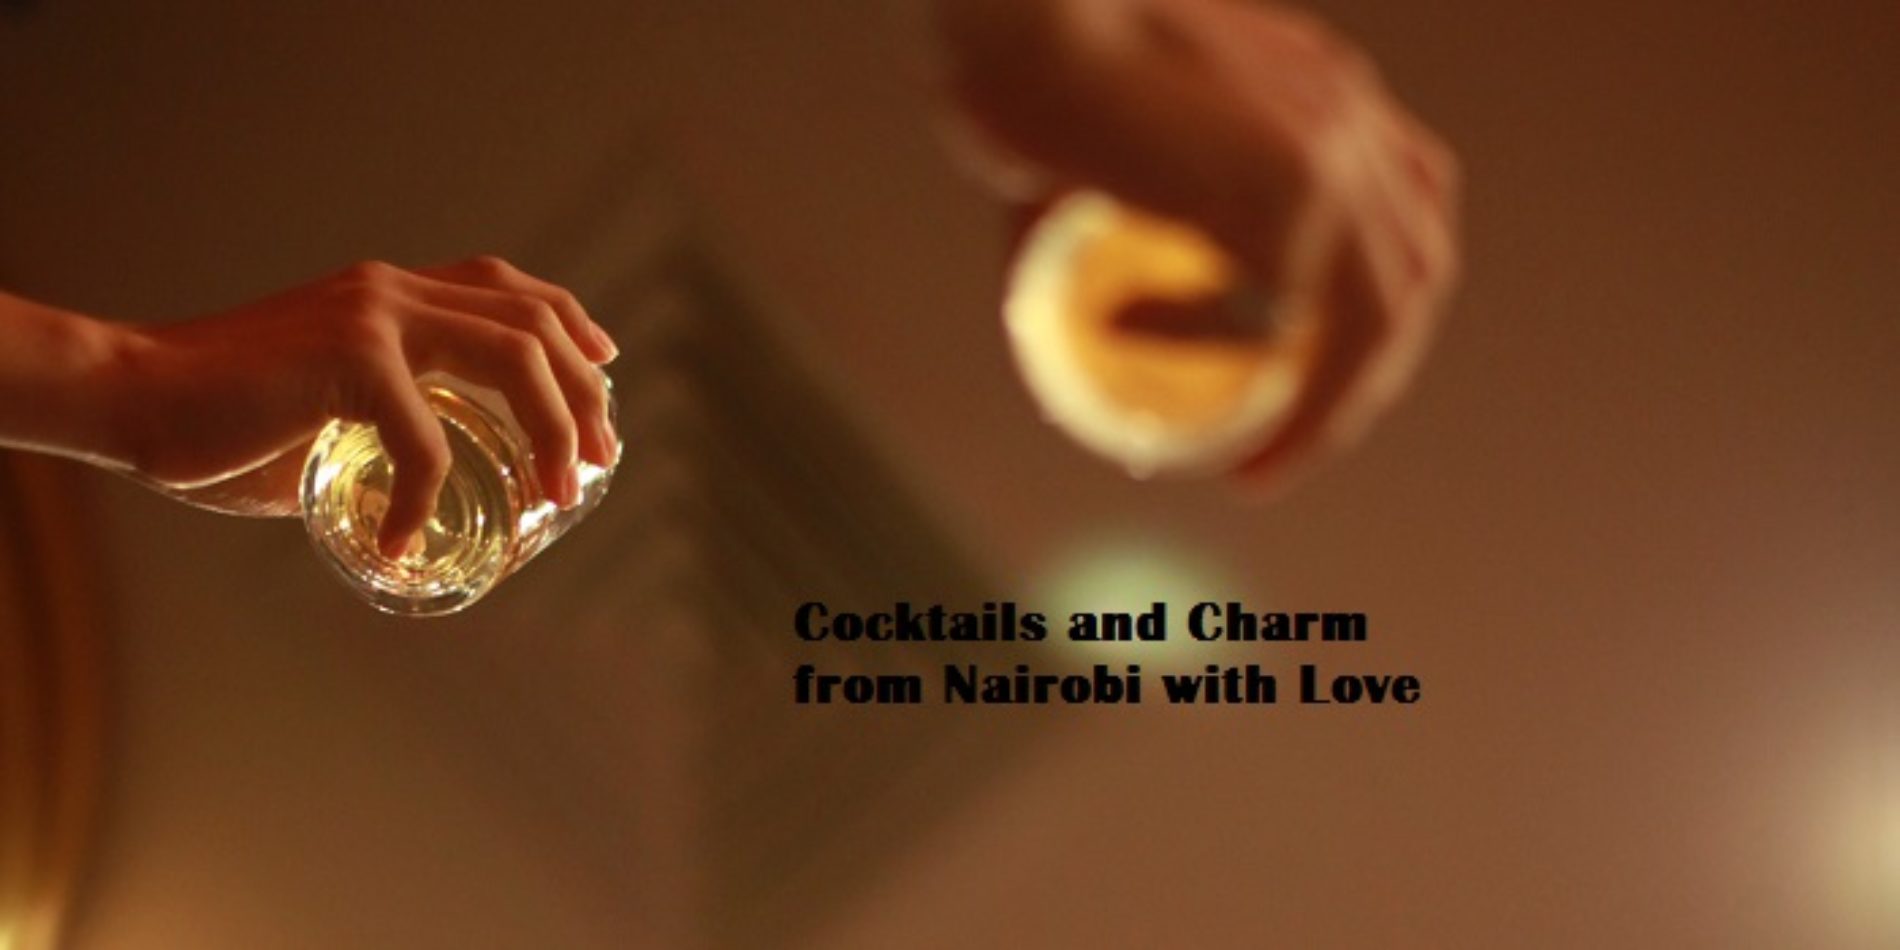 Cocktails and Charm from Nairobi with Love